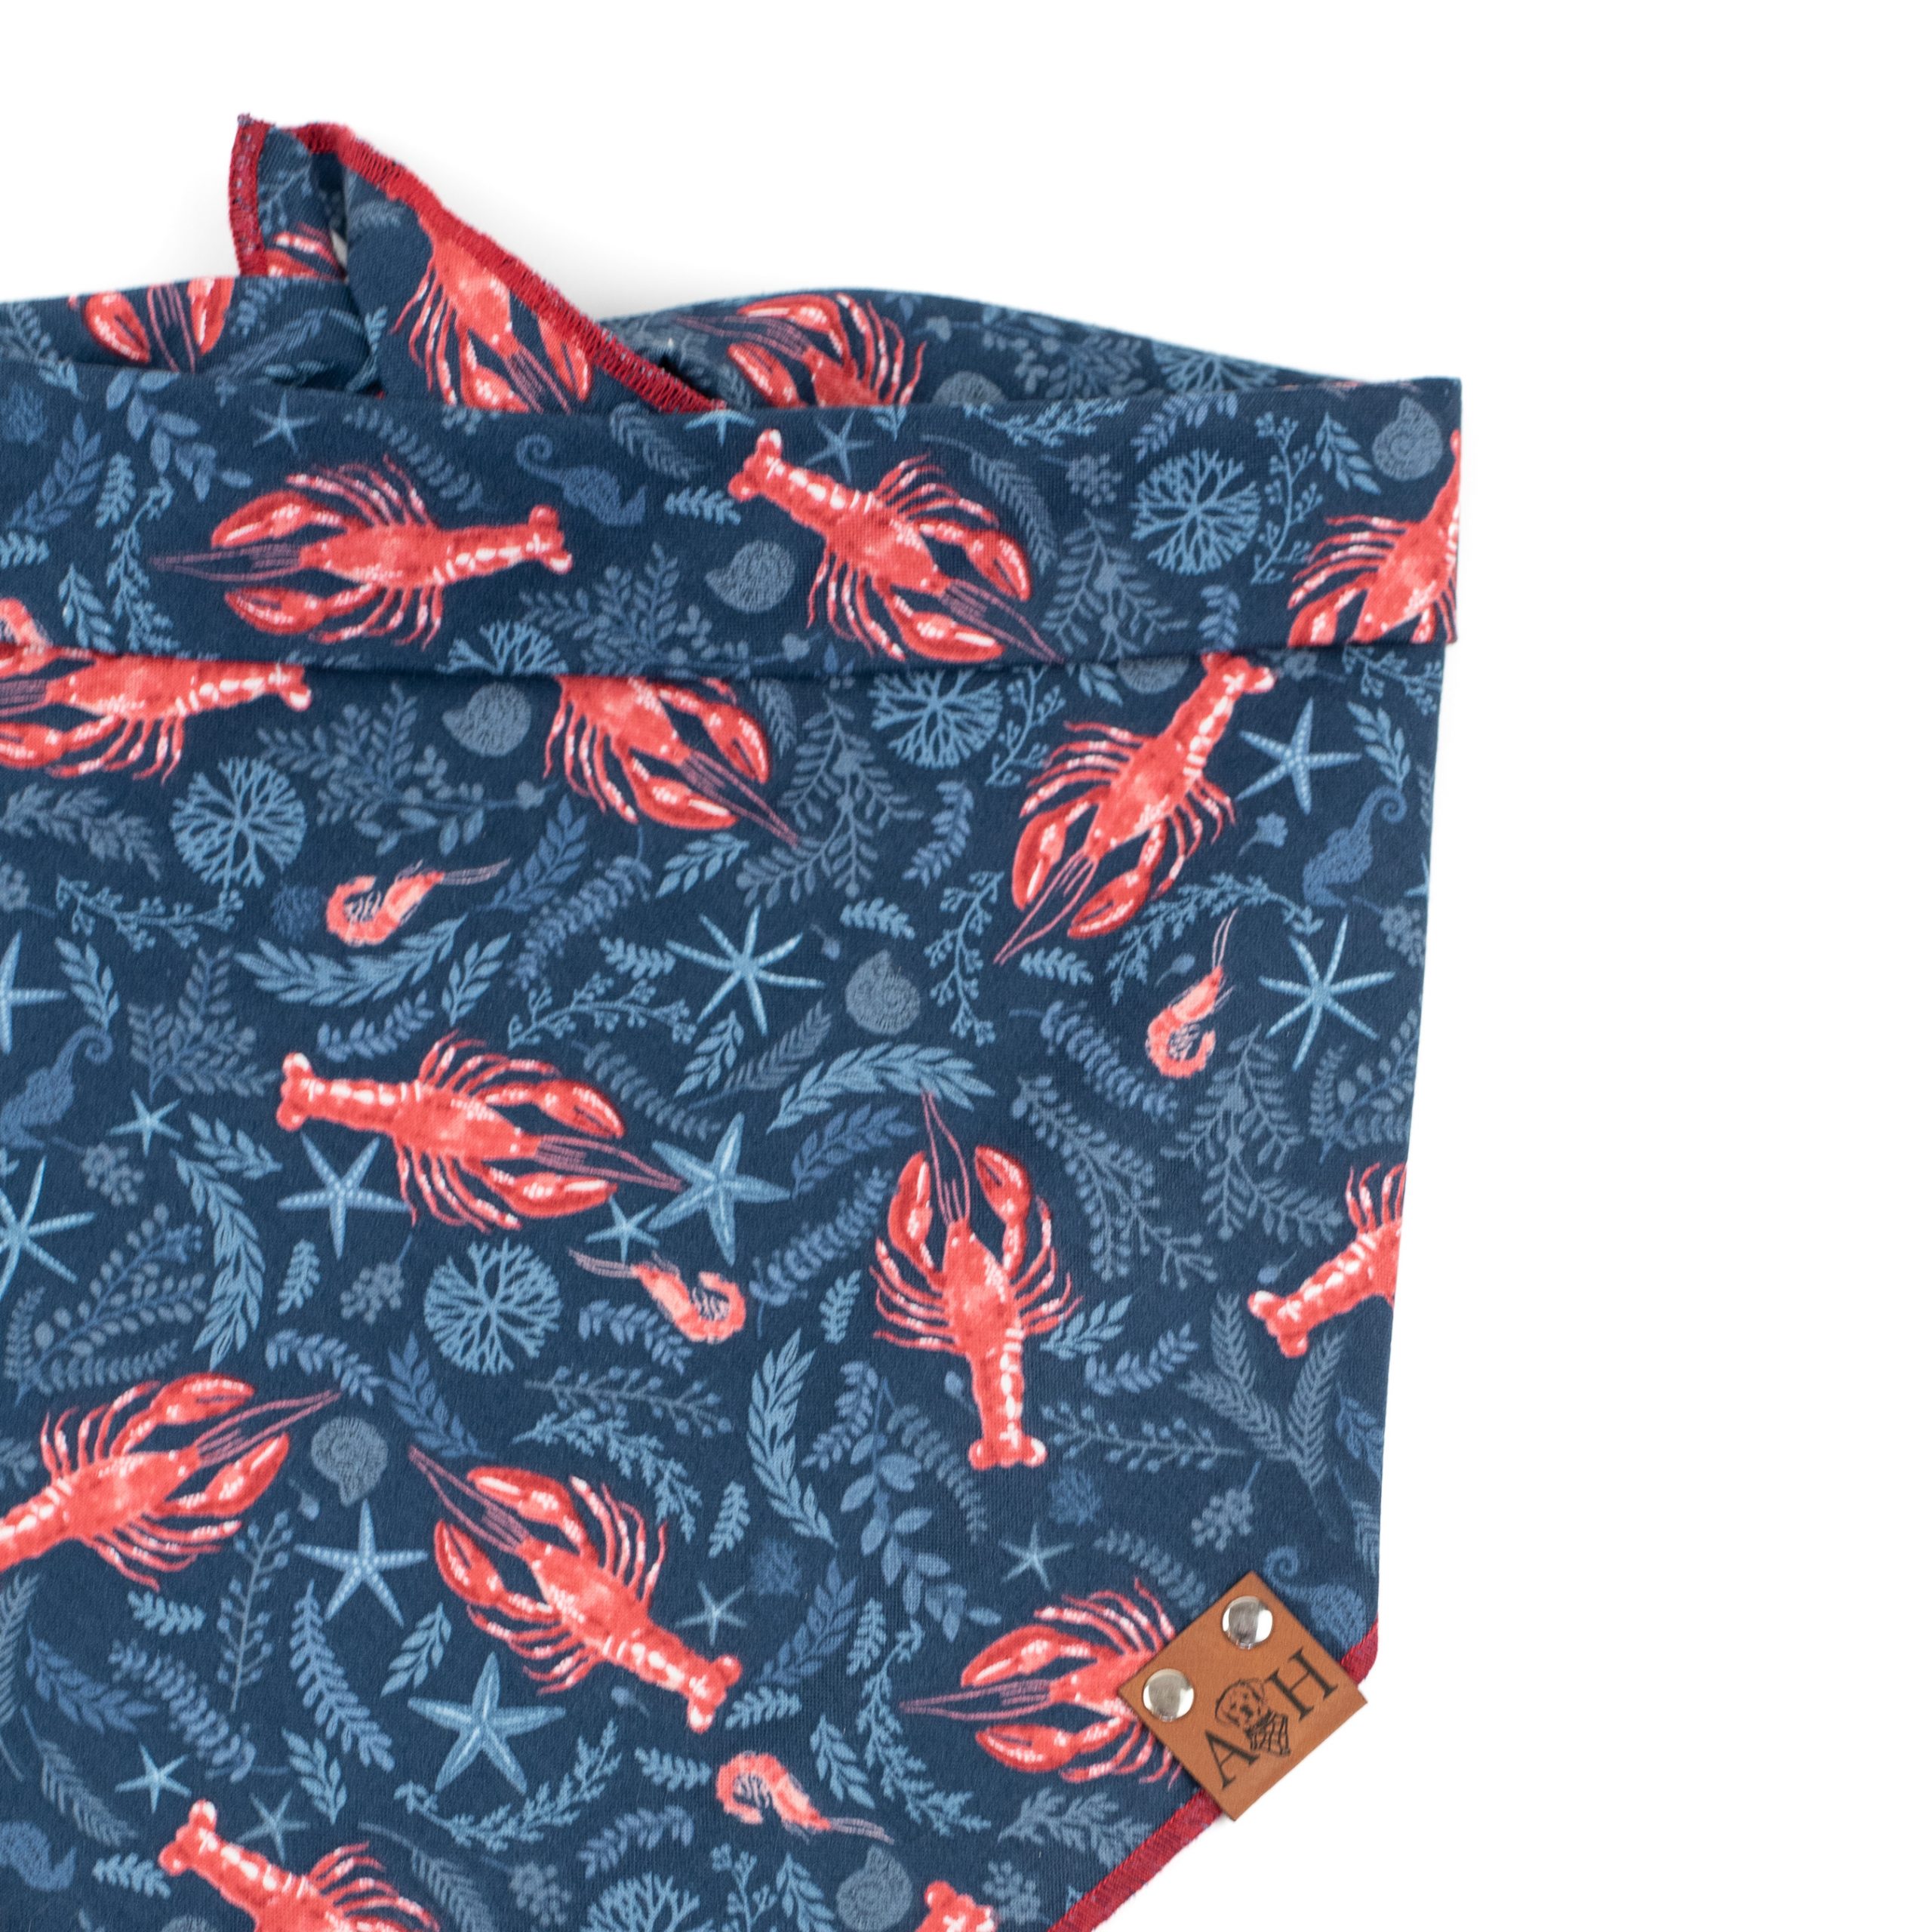 Lobster dog bandana with navy background, red lobsters and other ocean themes